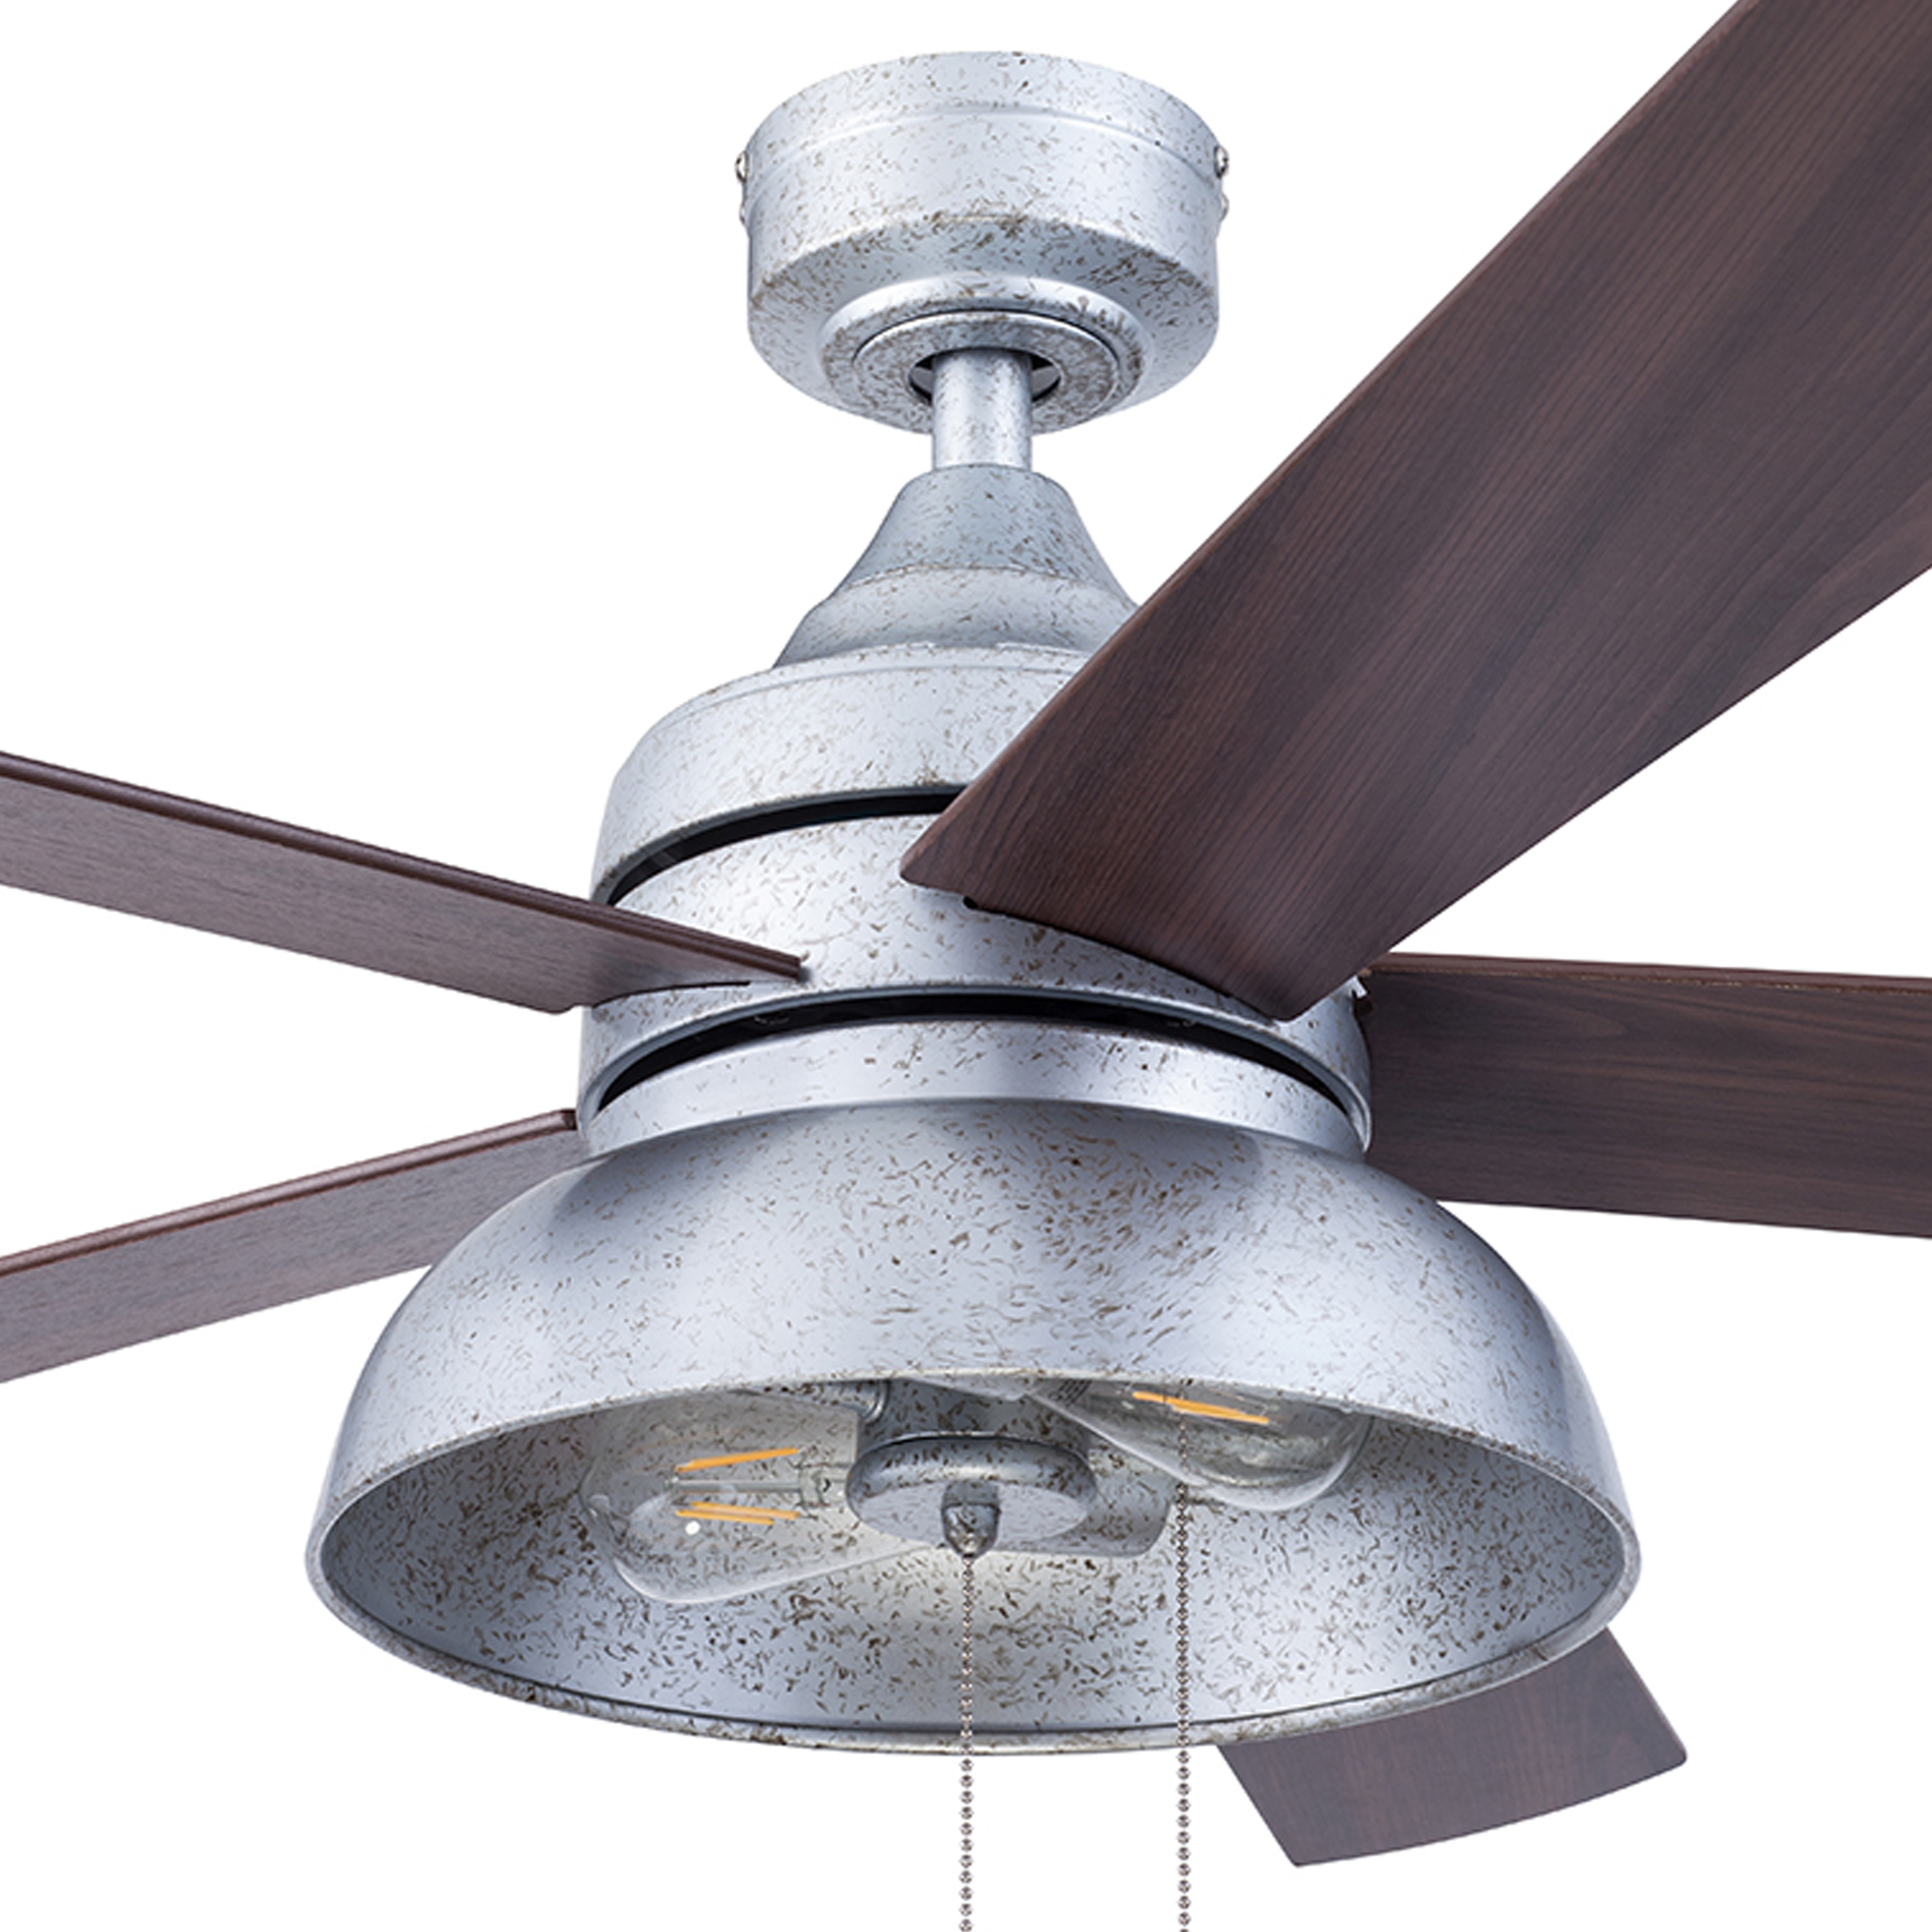 52 Inch Brightondale, Galvanized, Pull Chain, Indoor/Outdoor Ceiling Fan by Prominence Home